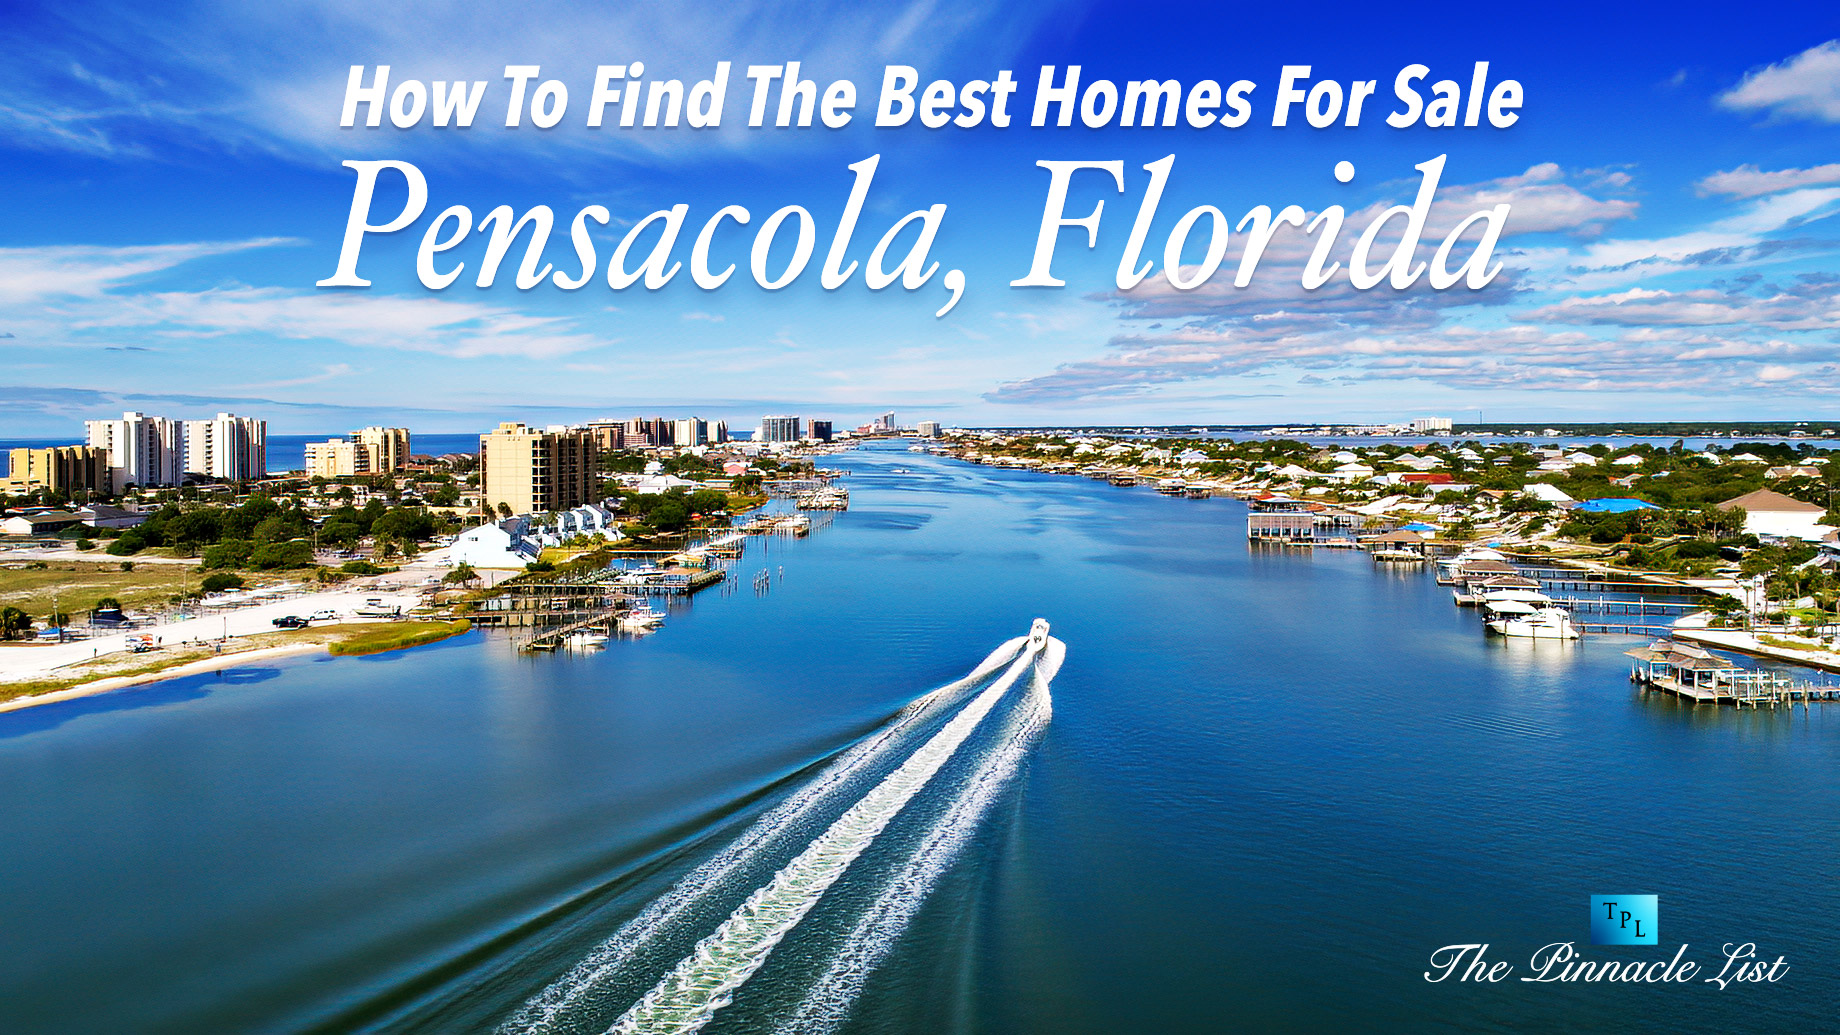 How To Find The Best Homes For Sale In Pensacola, Florida